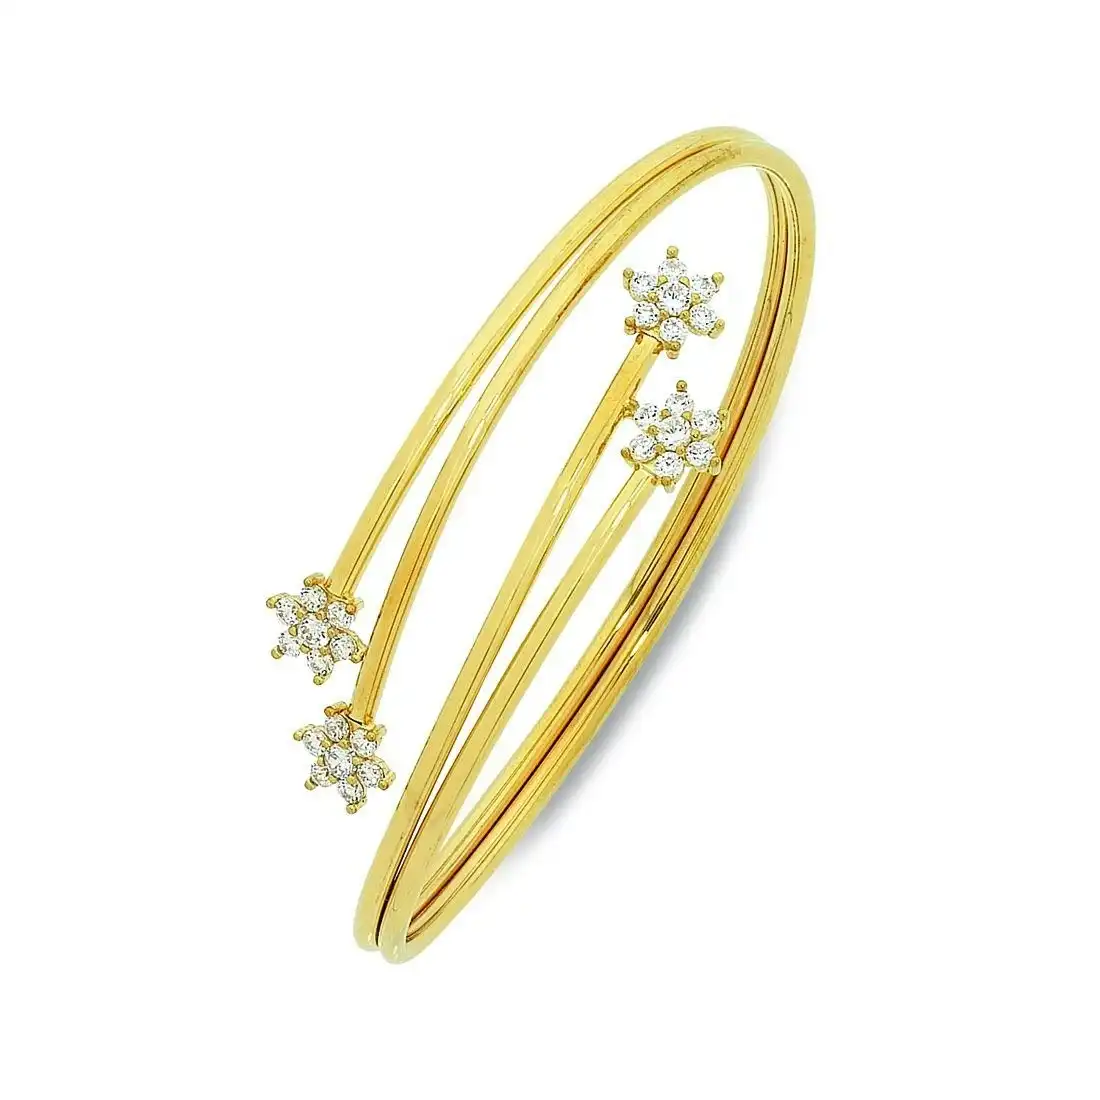 9ct Yellow Gold Silver Infused Bangle with Cubic Zirconia Flower Ends